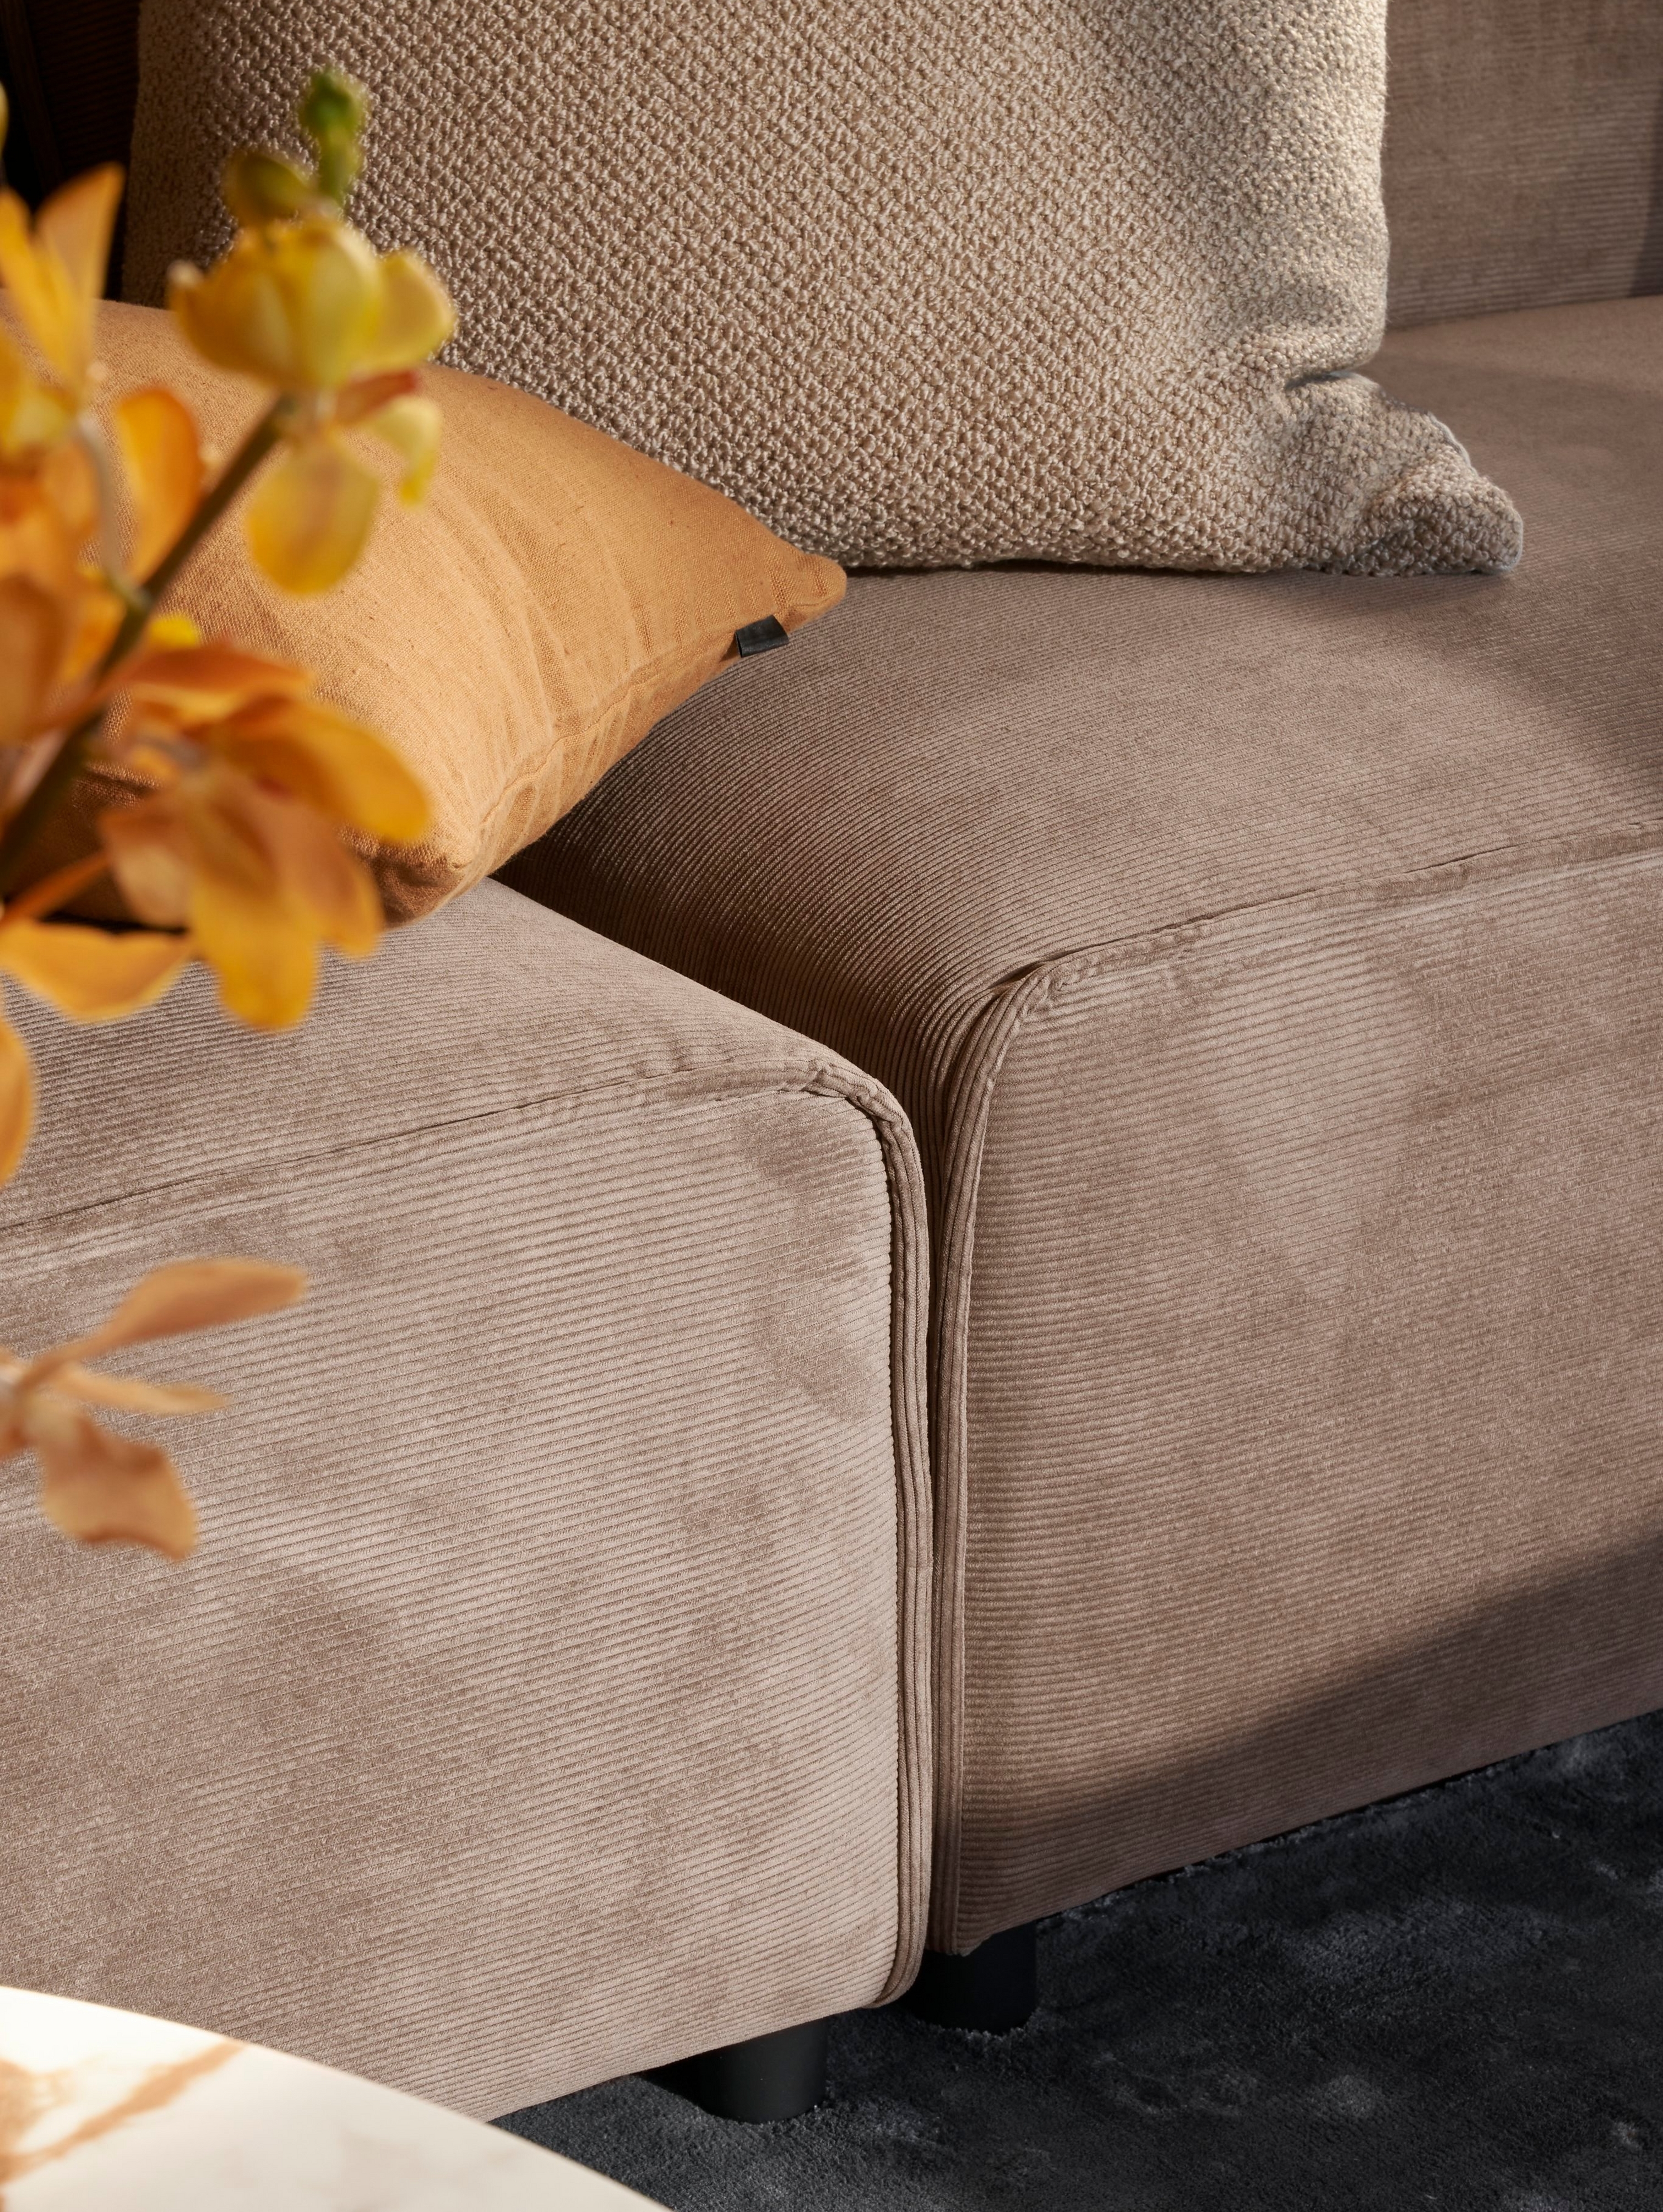 The Carmo sofa with it's oversized seats for comfortable sitting.